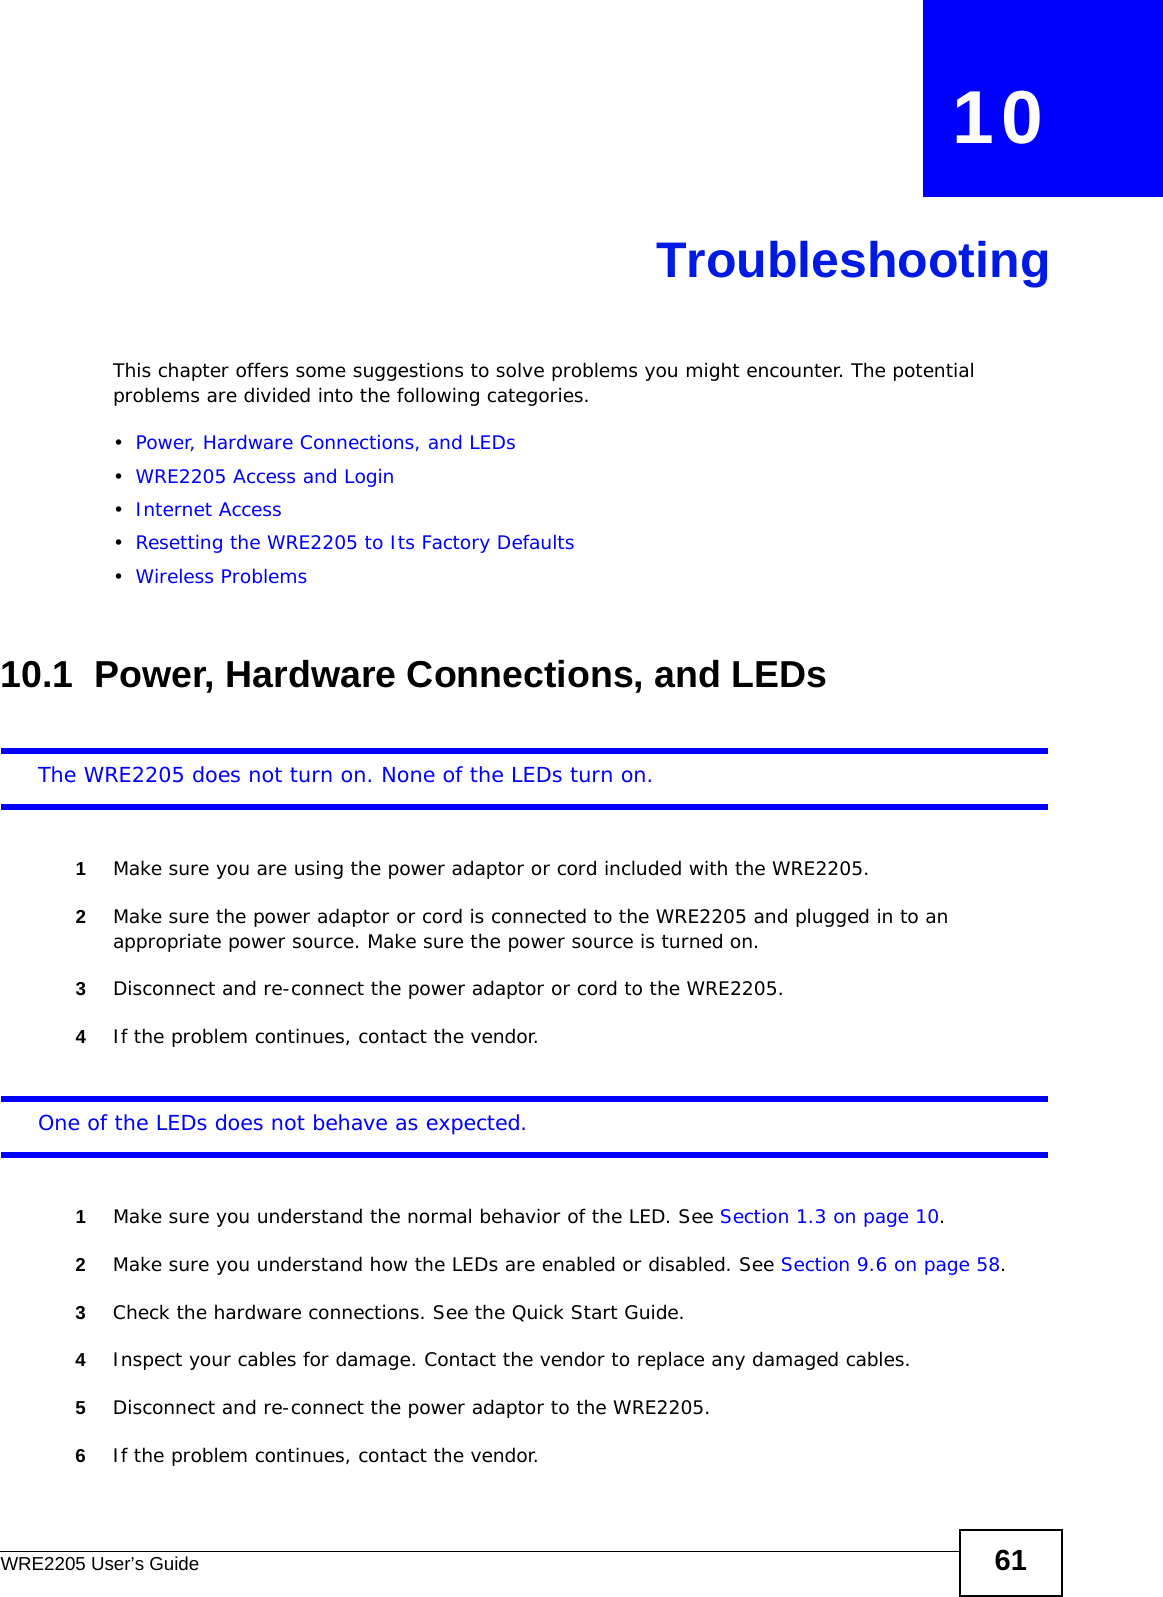 WRE2205 User’s Guide 61CHAPTER   10TroubleshootingThis chapter offers some suggestions to solve problems you might encounter. The potential problems are divided into the following categories. •Power, Hardware Connections, and LEDs•WRE2205 Access and Login•Internet Access•Resetting the WRE2205 to Its Factory Defaults•Wireless Problems10.1  Power, Hardware Connections, and LEDsThe WRE2205 does not turn on. None of the LEDs turn on.1Make sure you are using the power adaptor or cord included with the WRE2205.2Make sure the power adaptor or cord is connected to the WRE2205 and plugged in to an appropriate power source. Make sure the power source is turned on.3Disconnect and re-connect the power adaptor or cord to the WRE2205.4If the problem continues, contact the vendor.One of the LEDs does not behave as expected.1Make sure you understand the normal behavior of the LED. See Section 1.3 on page 10.2Make sure you understand how the LEDs are enabled or disabled. See Section 9.6 on page 58.3Check the hardware connections. See the Quick Start Guide. 4Inspect your cables for damage. Contact the vendor to replace any damaged cables.5Disconnect and re-connect the power adaptor to the WRE2205. 6If the problem continues, contact the vendor.